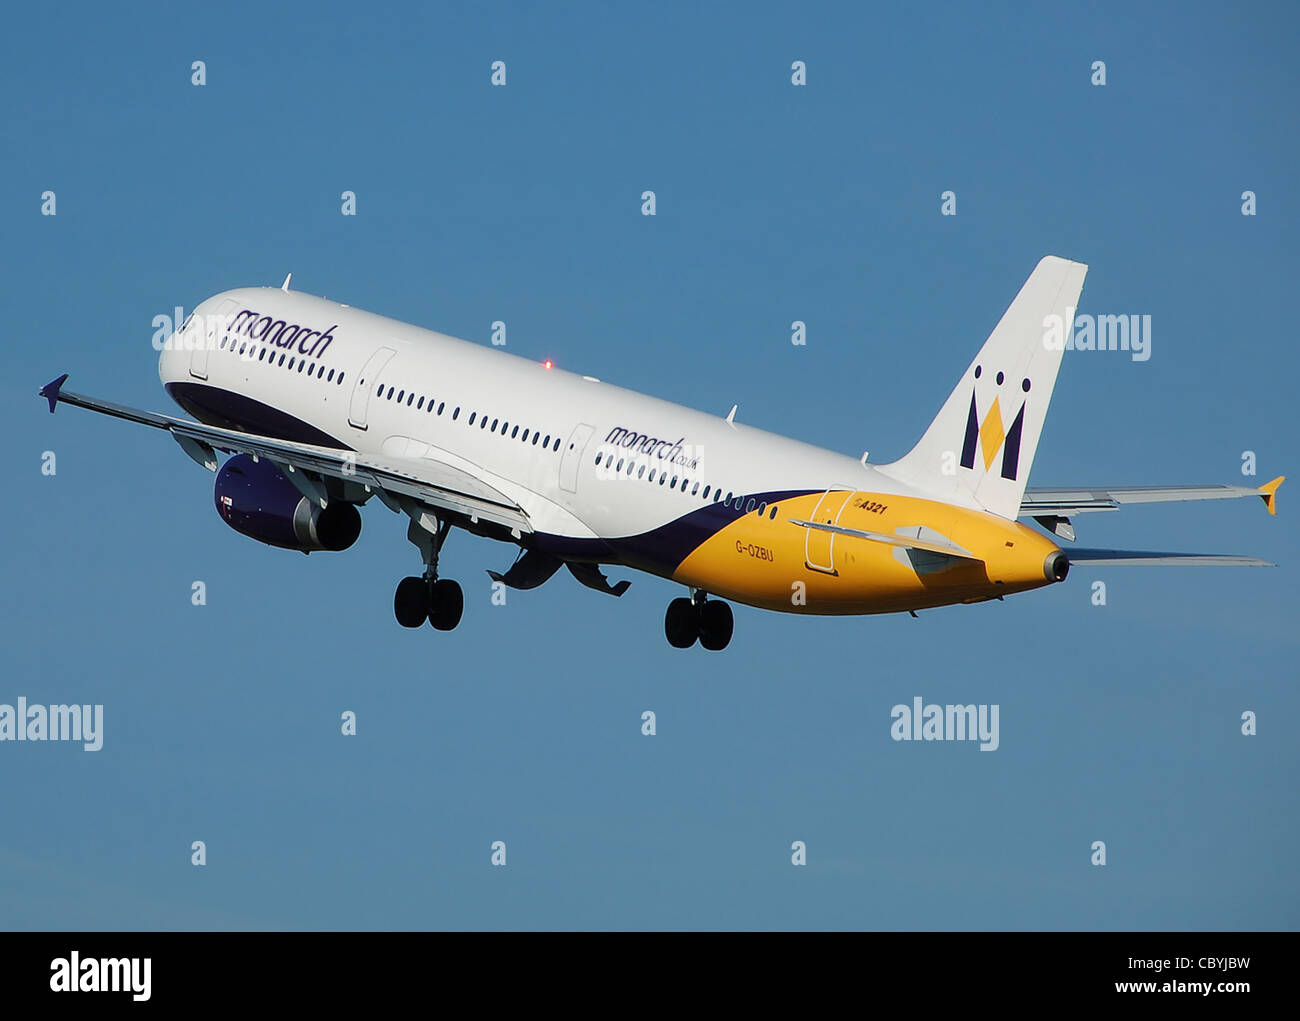 Monarch Airlines Airbus A321-200 (G-OZBU) takes off at Manchester Airport, England. Stock Photo